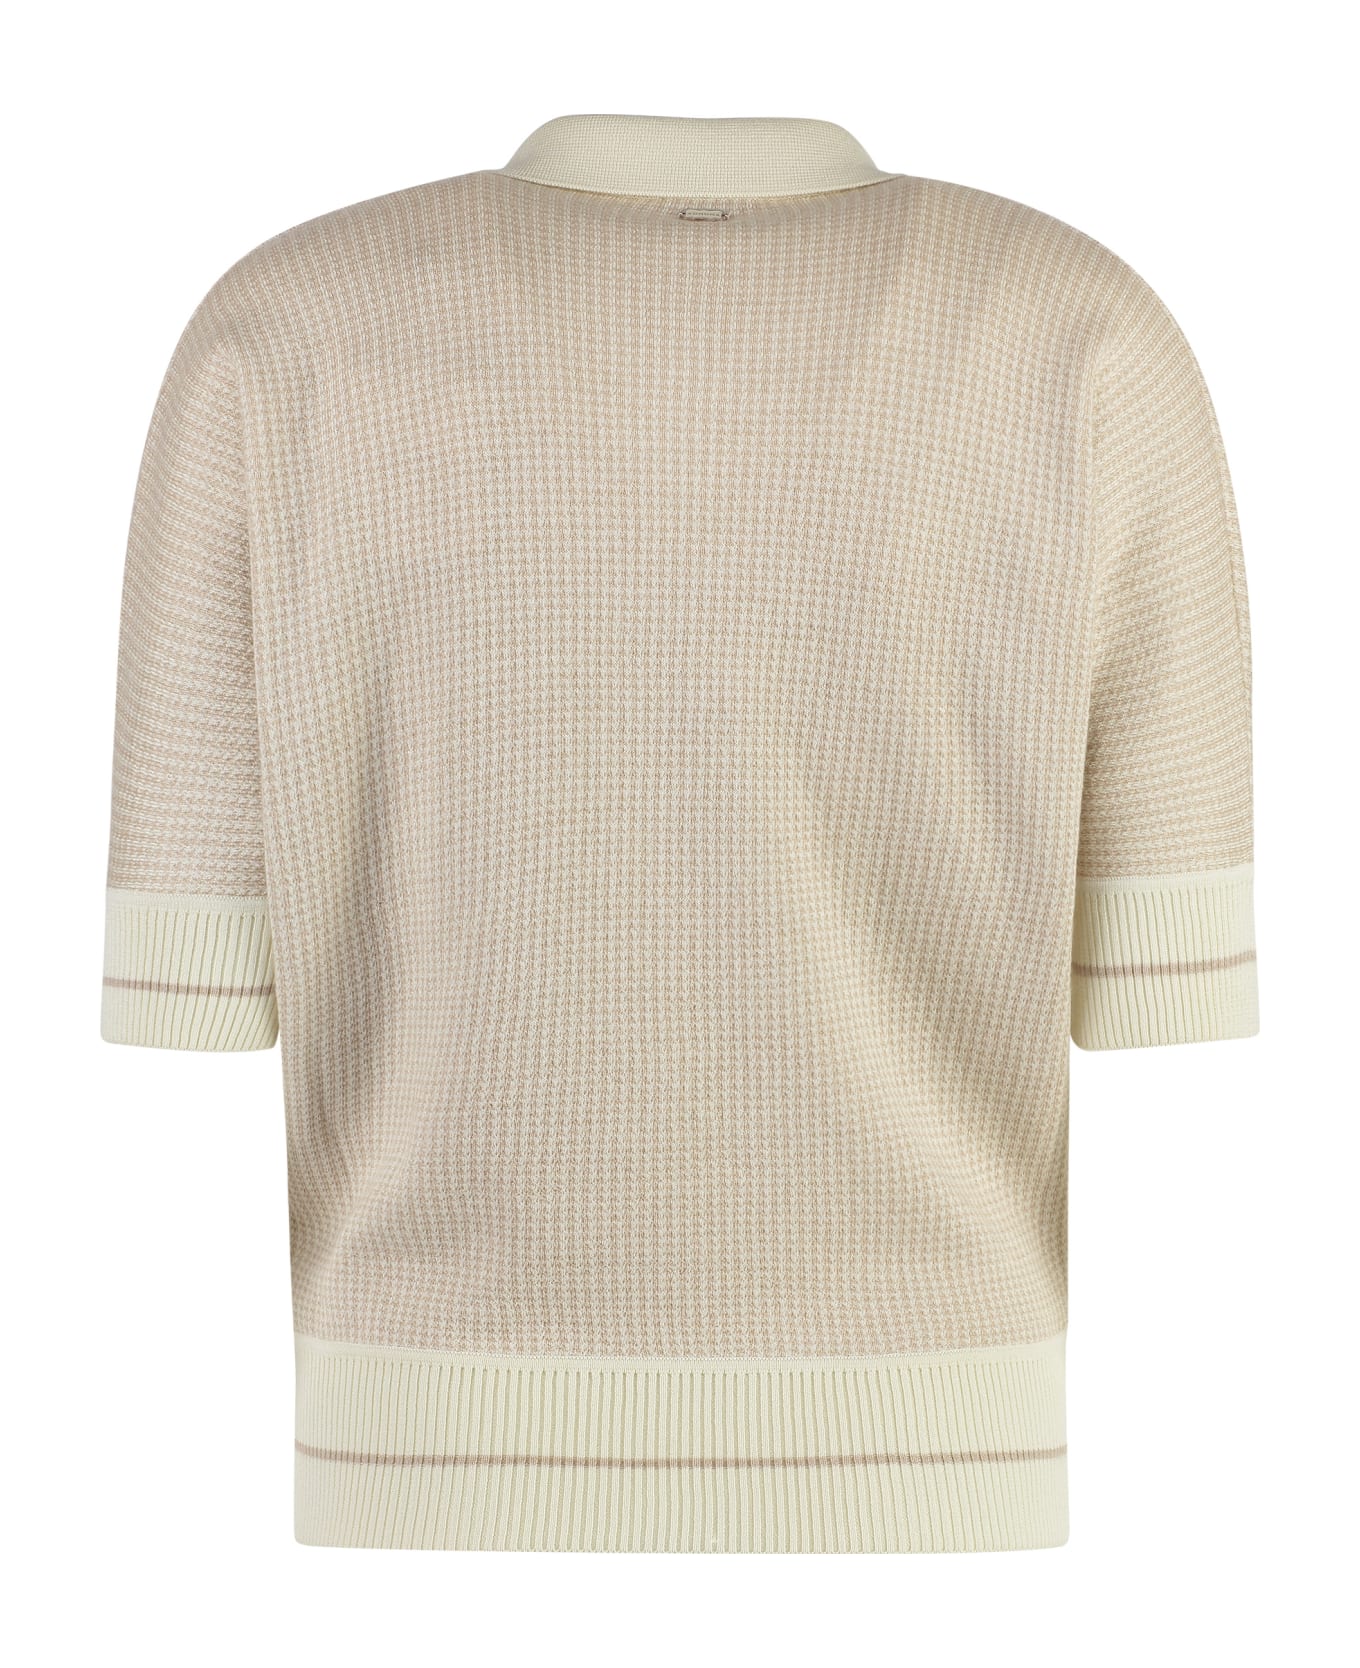 Agnona Contrast Trim Knitted Polo Shirt - Beige ポロシャツ